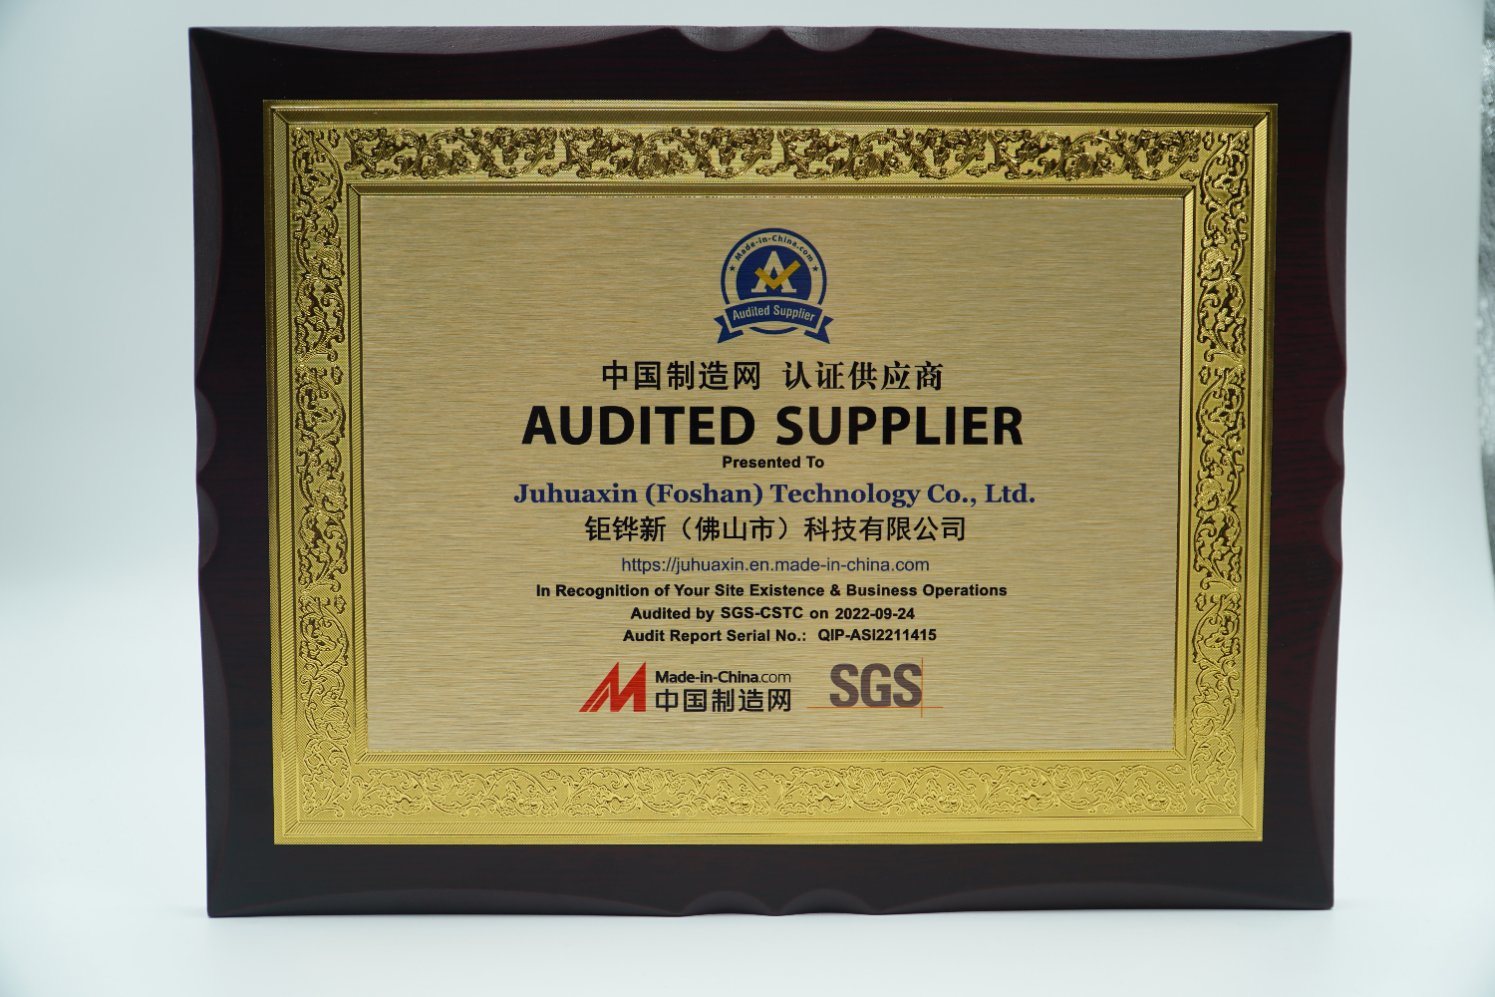 Certification of Made in China